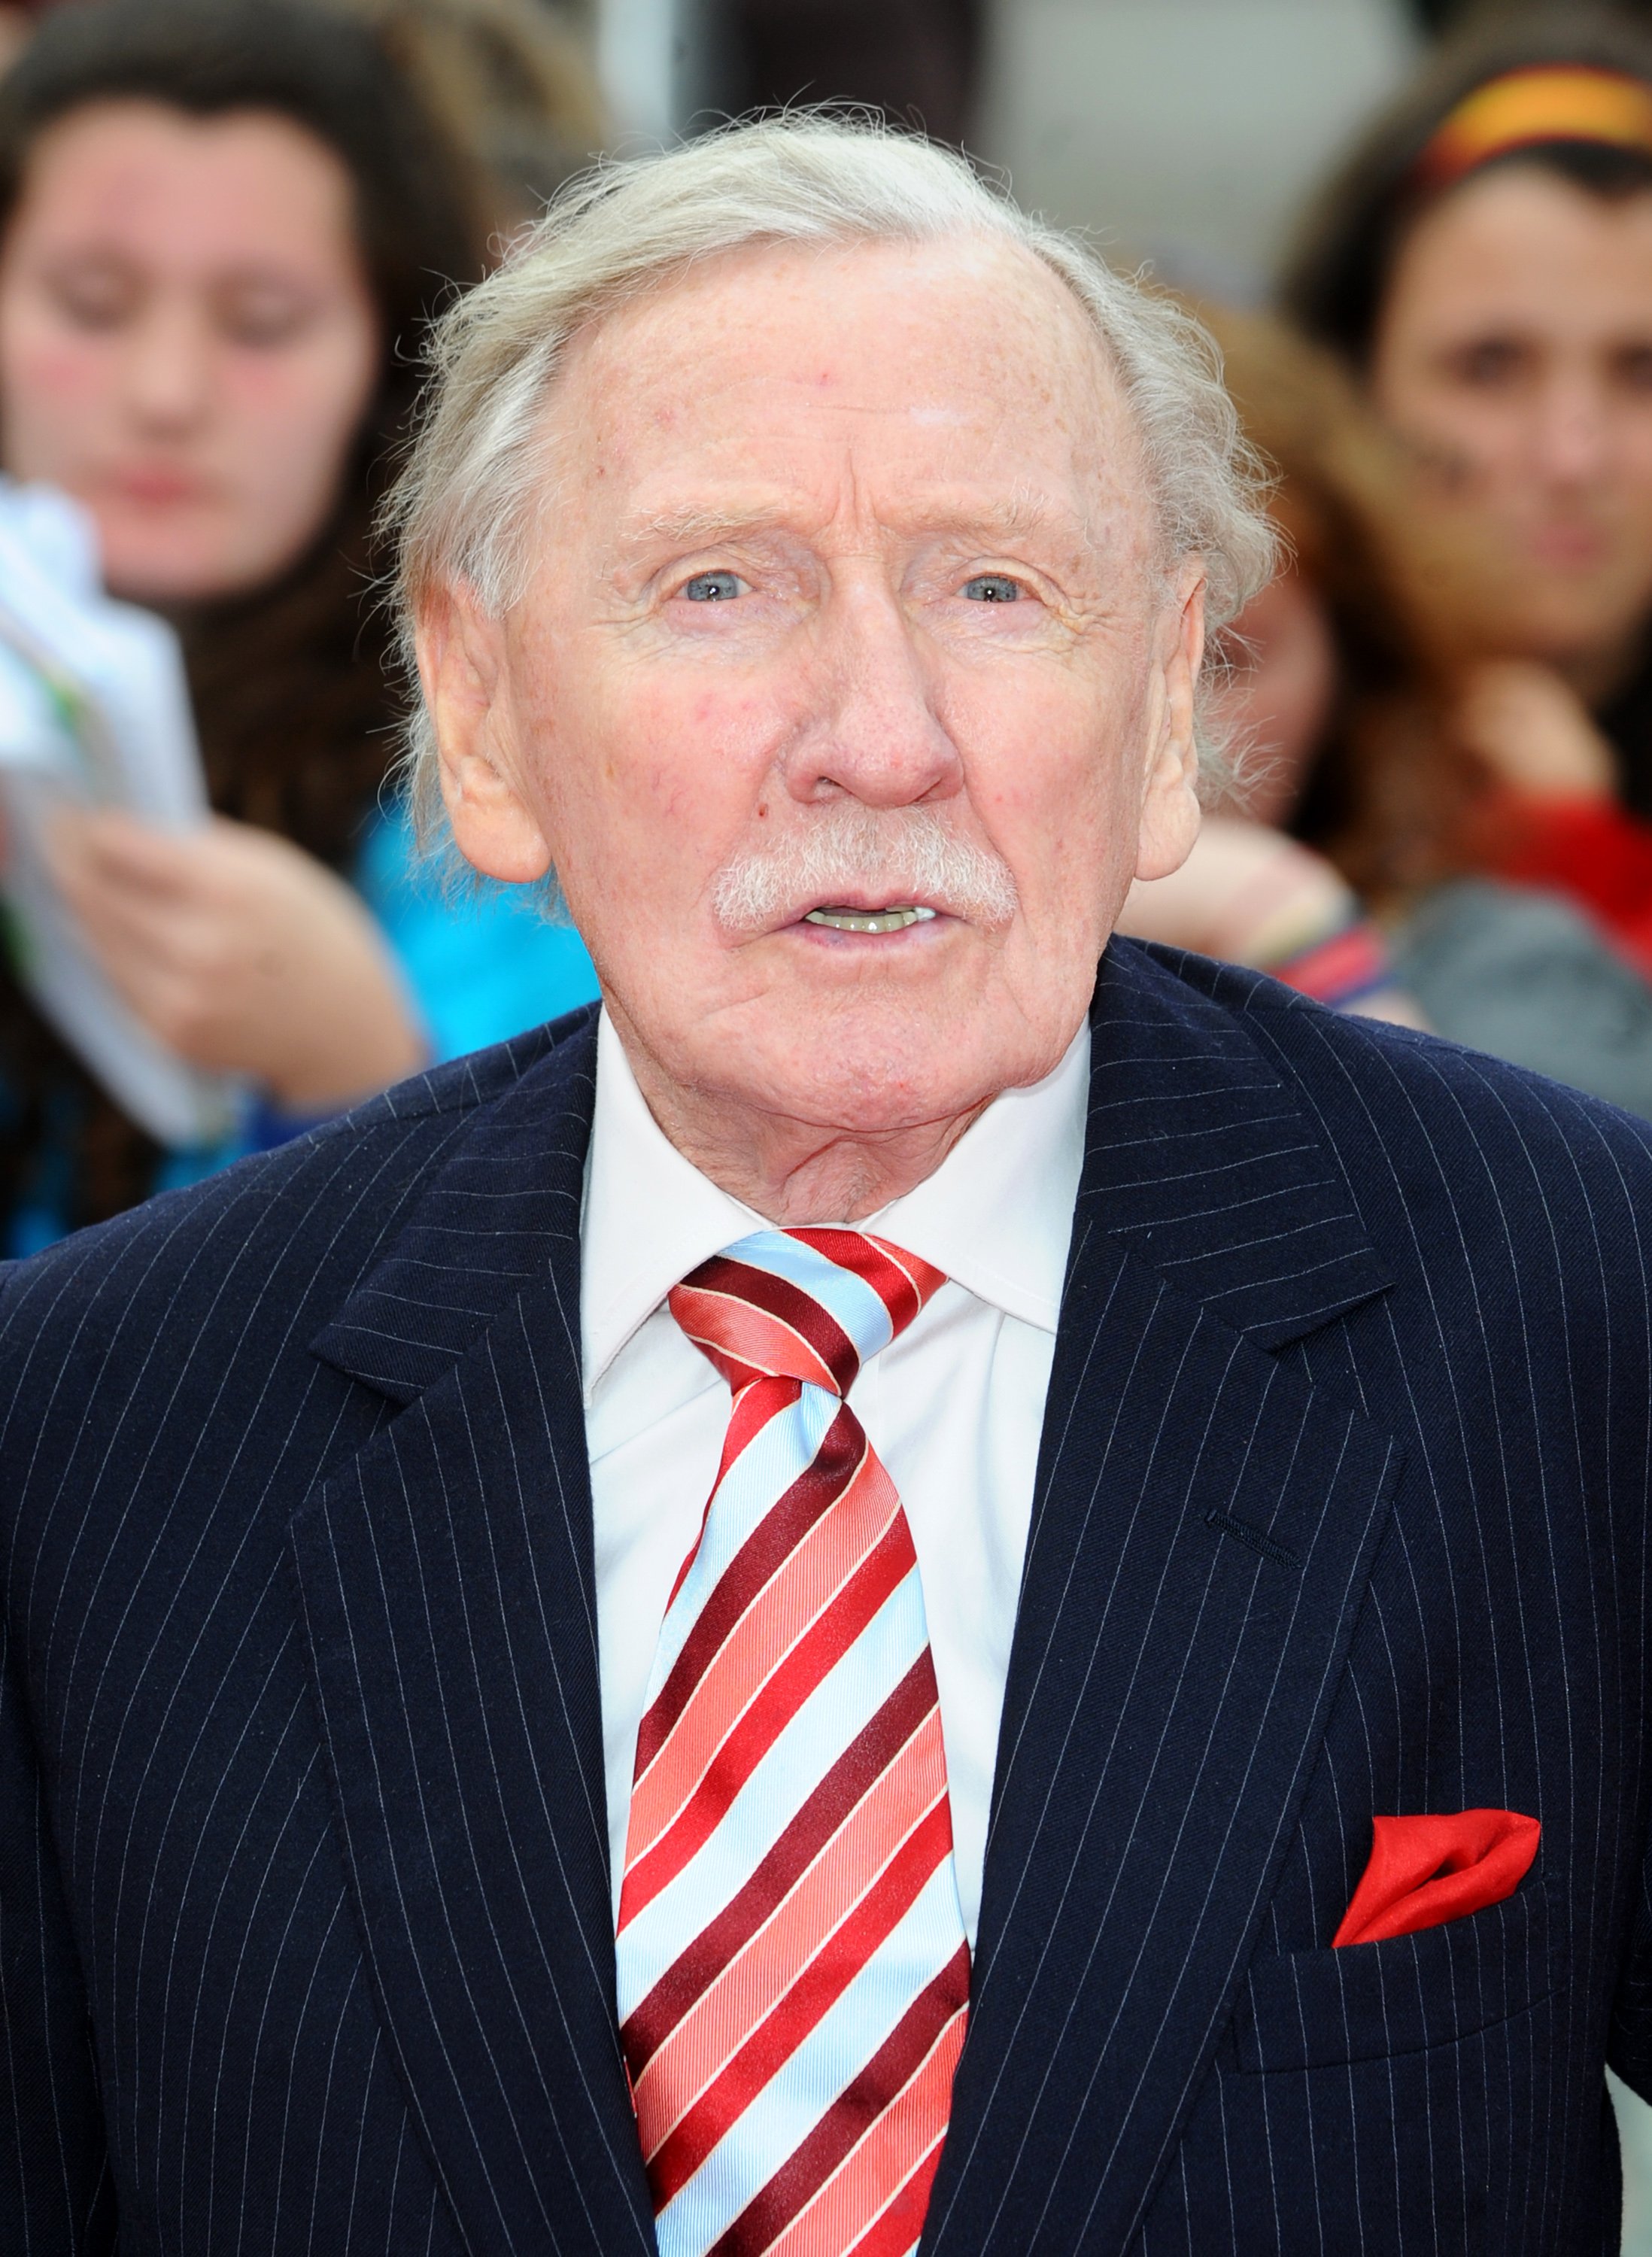 Leslie Phillips at the "Harry Potter and the Deathly Hallows: Part 2" Premiere in Trafalgar Square on July 7, 2011, in London | Source: Getty Images